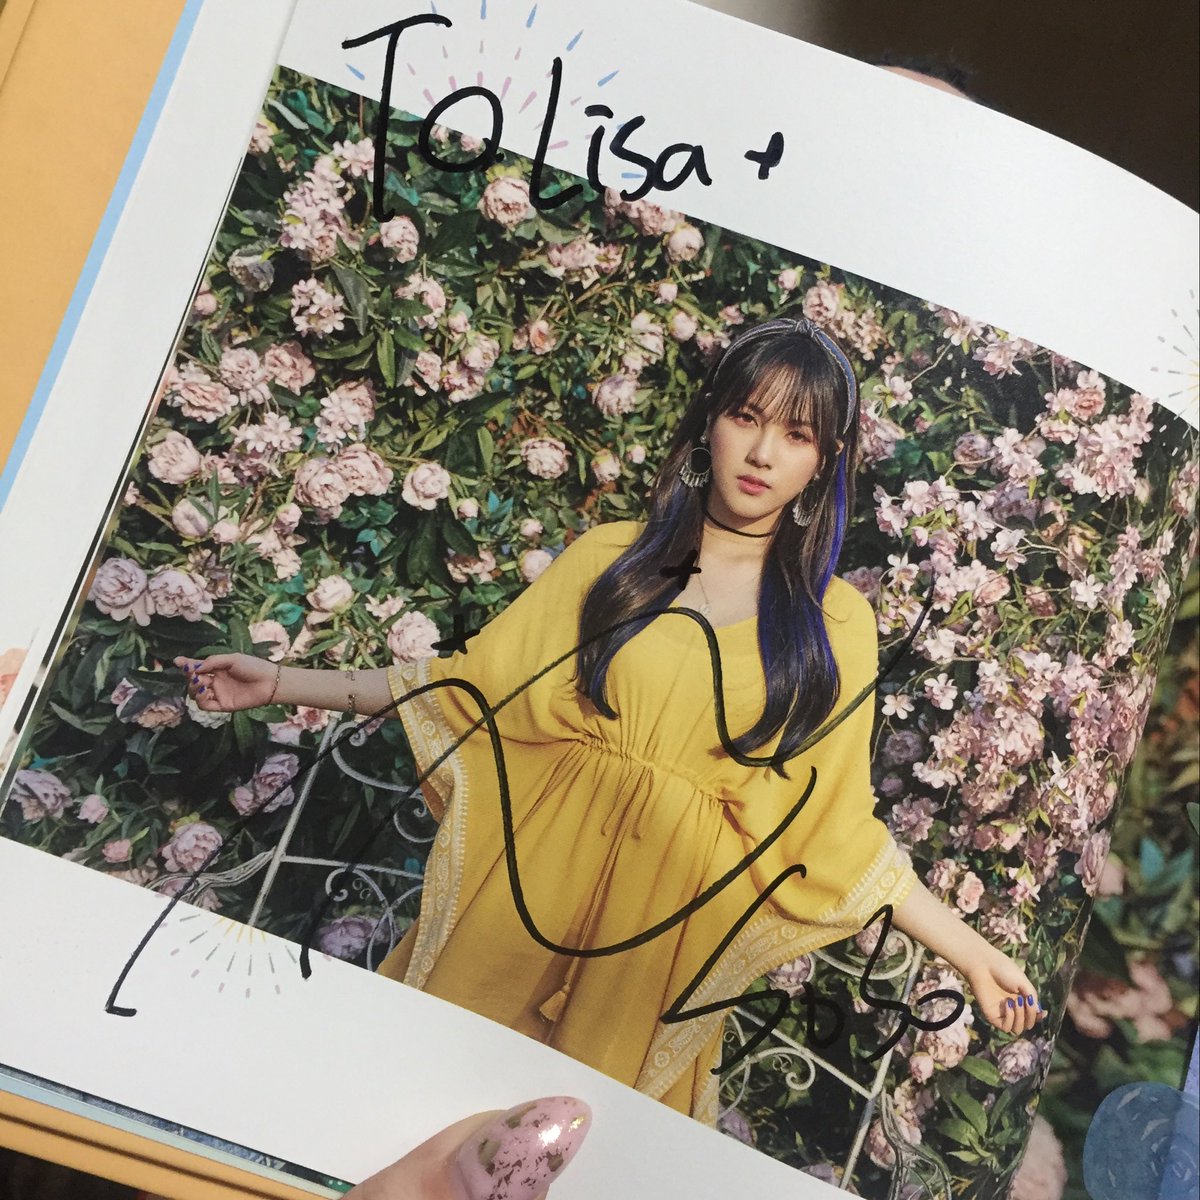 soso greeted me by saying my name without looking at the album again  she’s the best at remembering fans’ names. her memory is amazing...